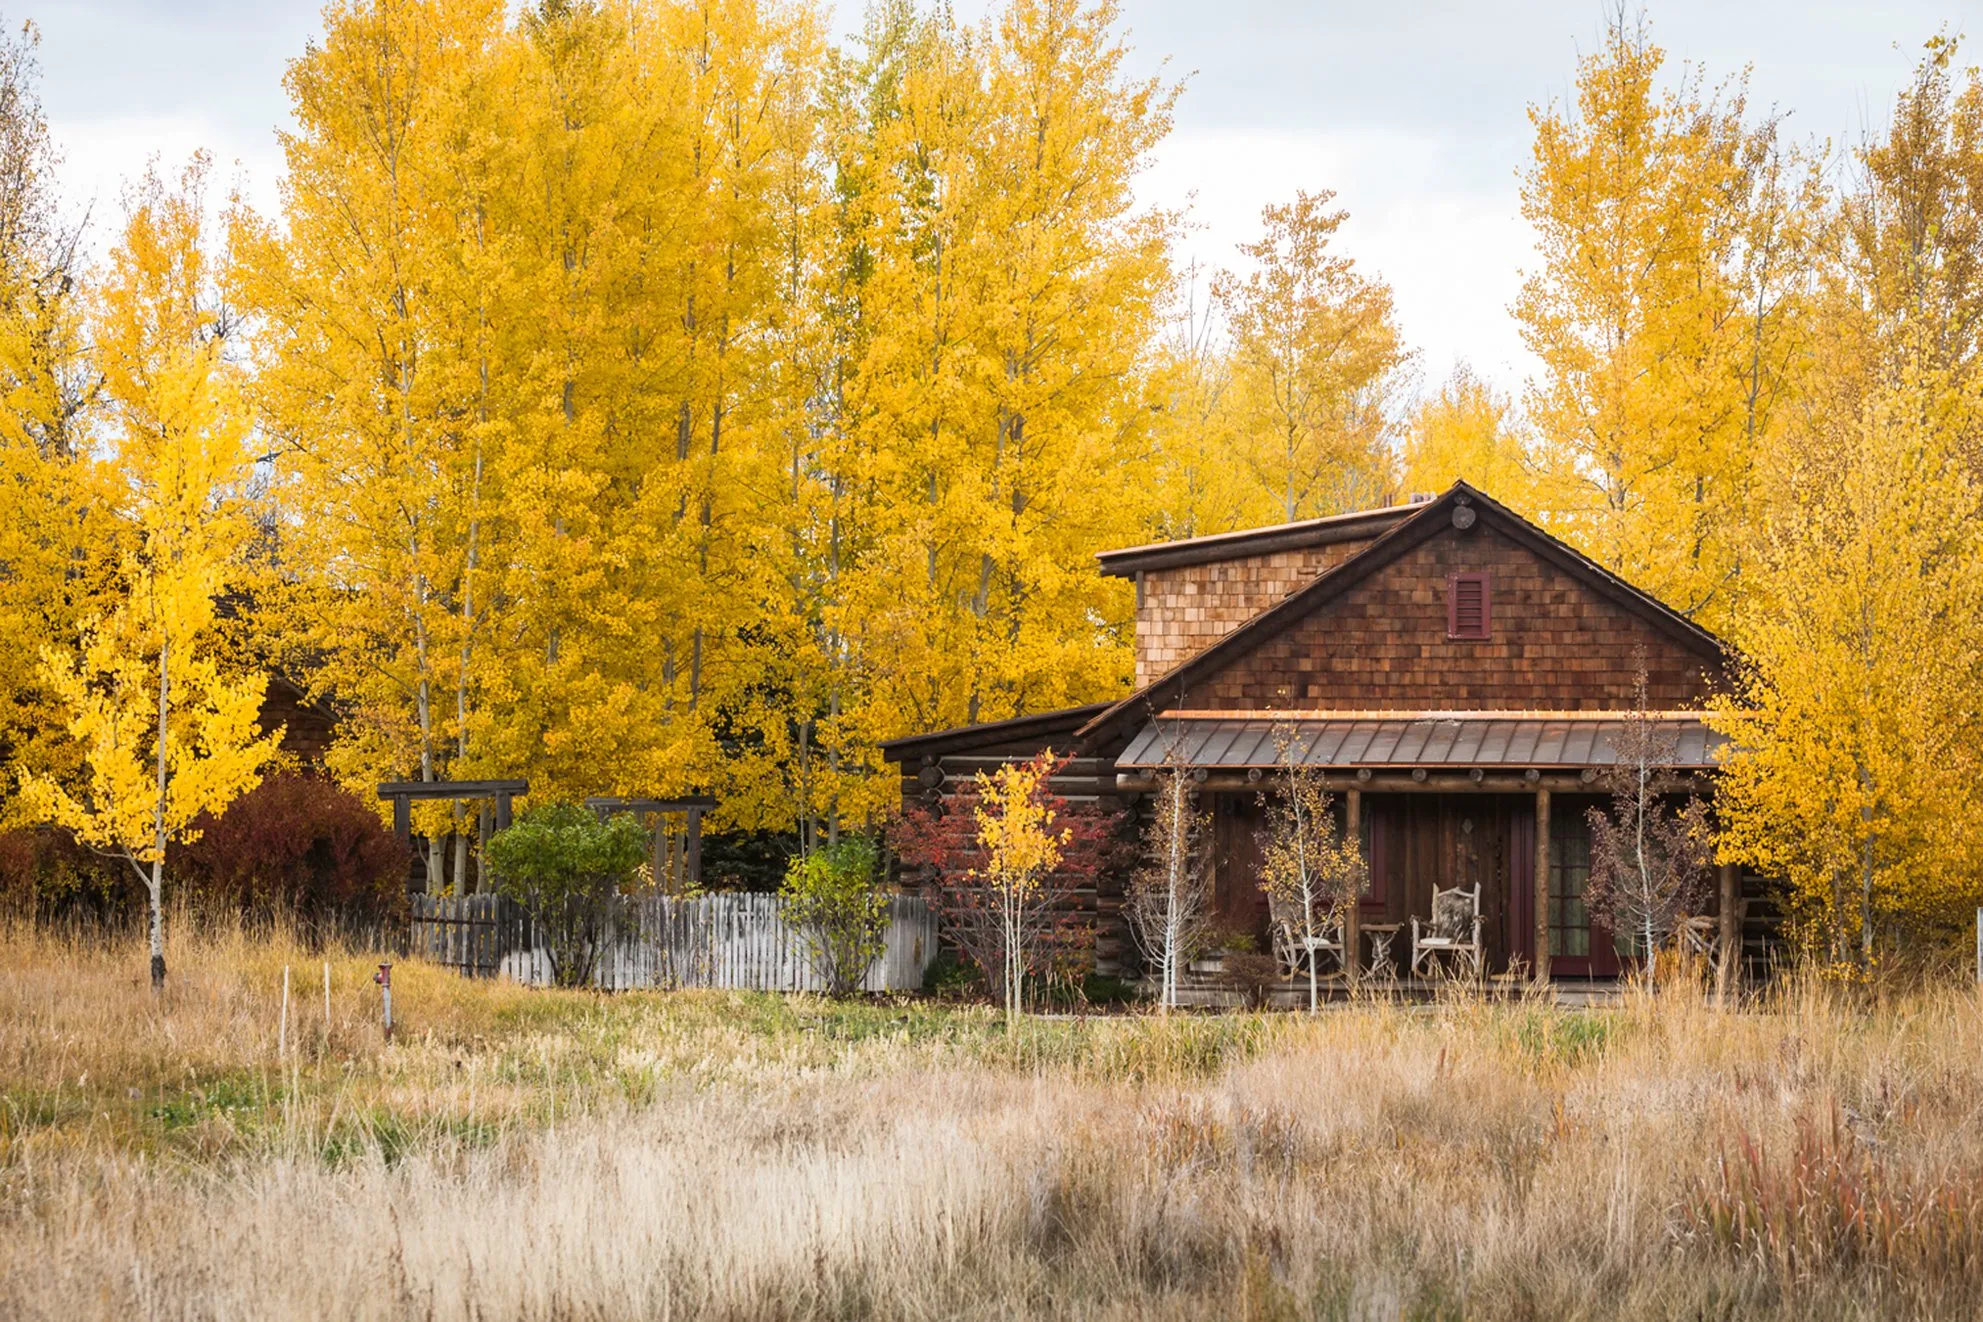 Cabin surrounded by trees in the Autumn